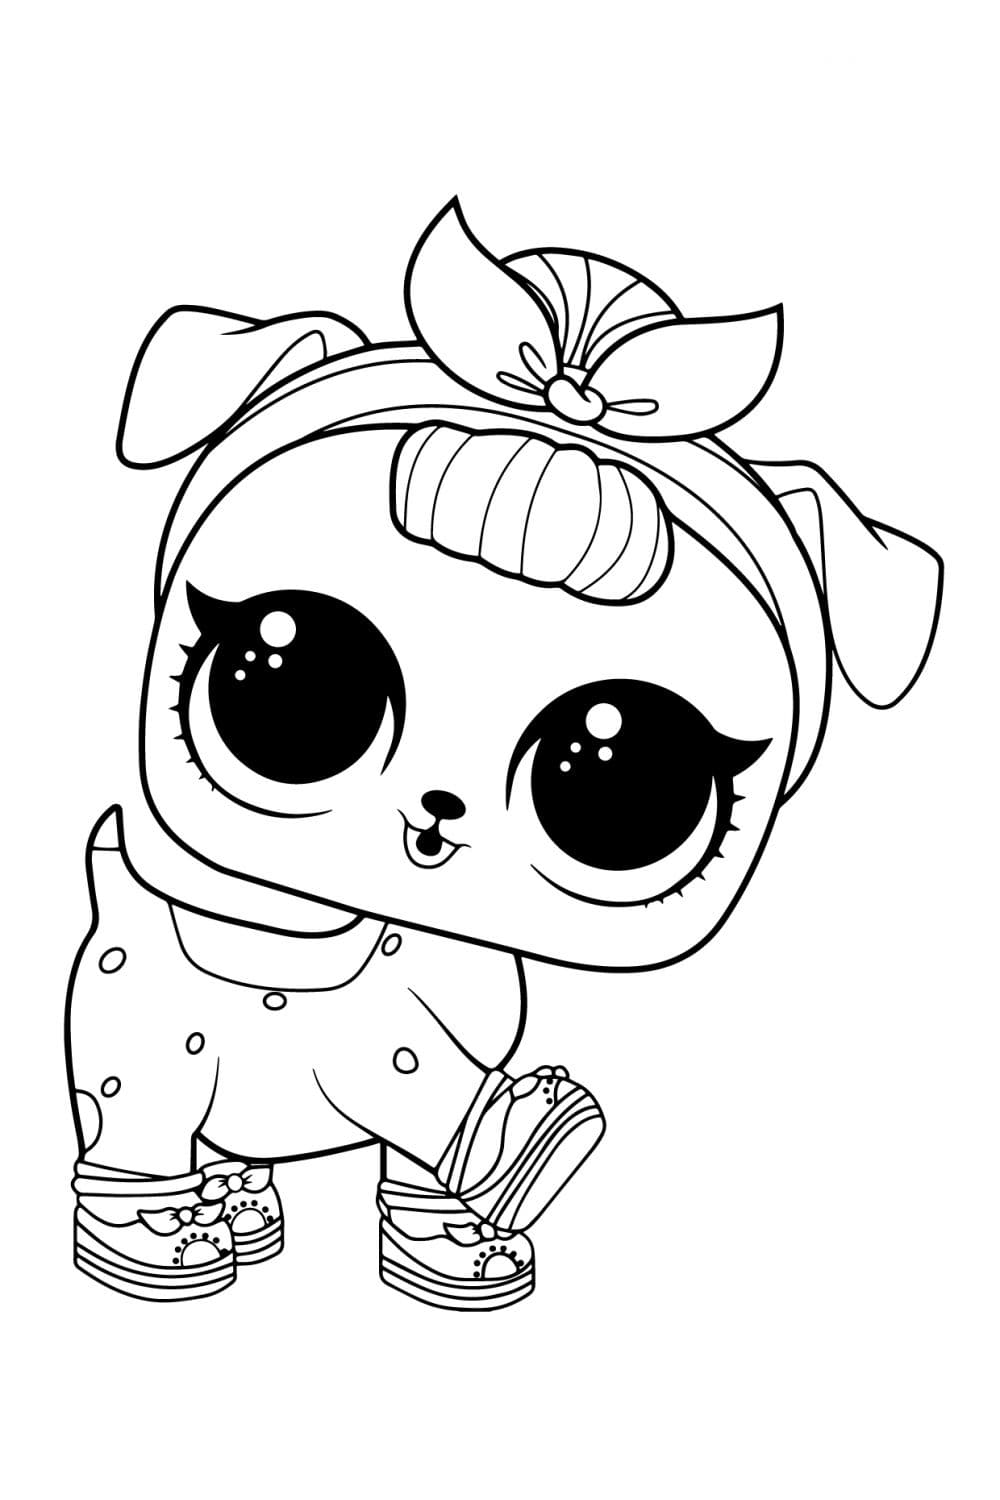 LOL Pet Puppy BBC Coloring Page   Free Printable Coloring Pages ...